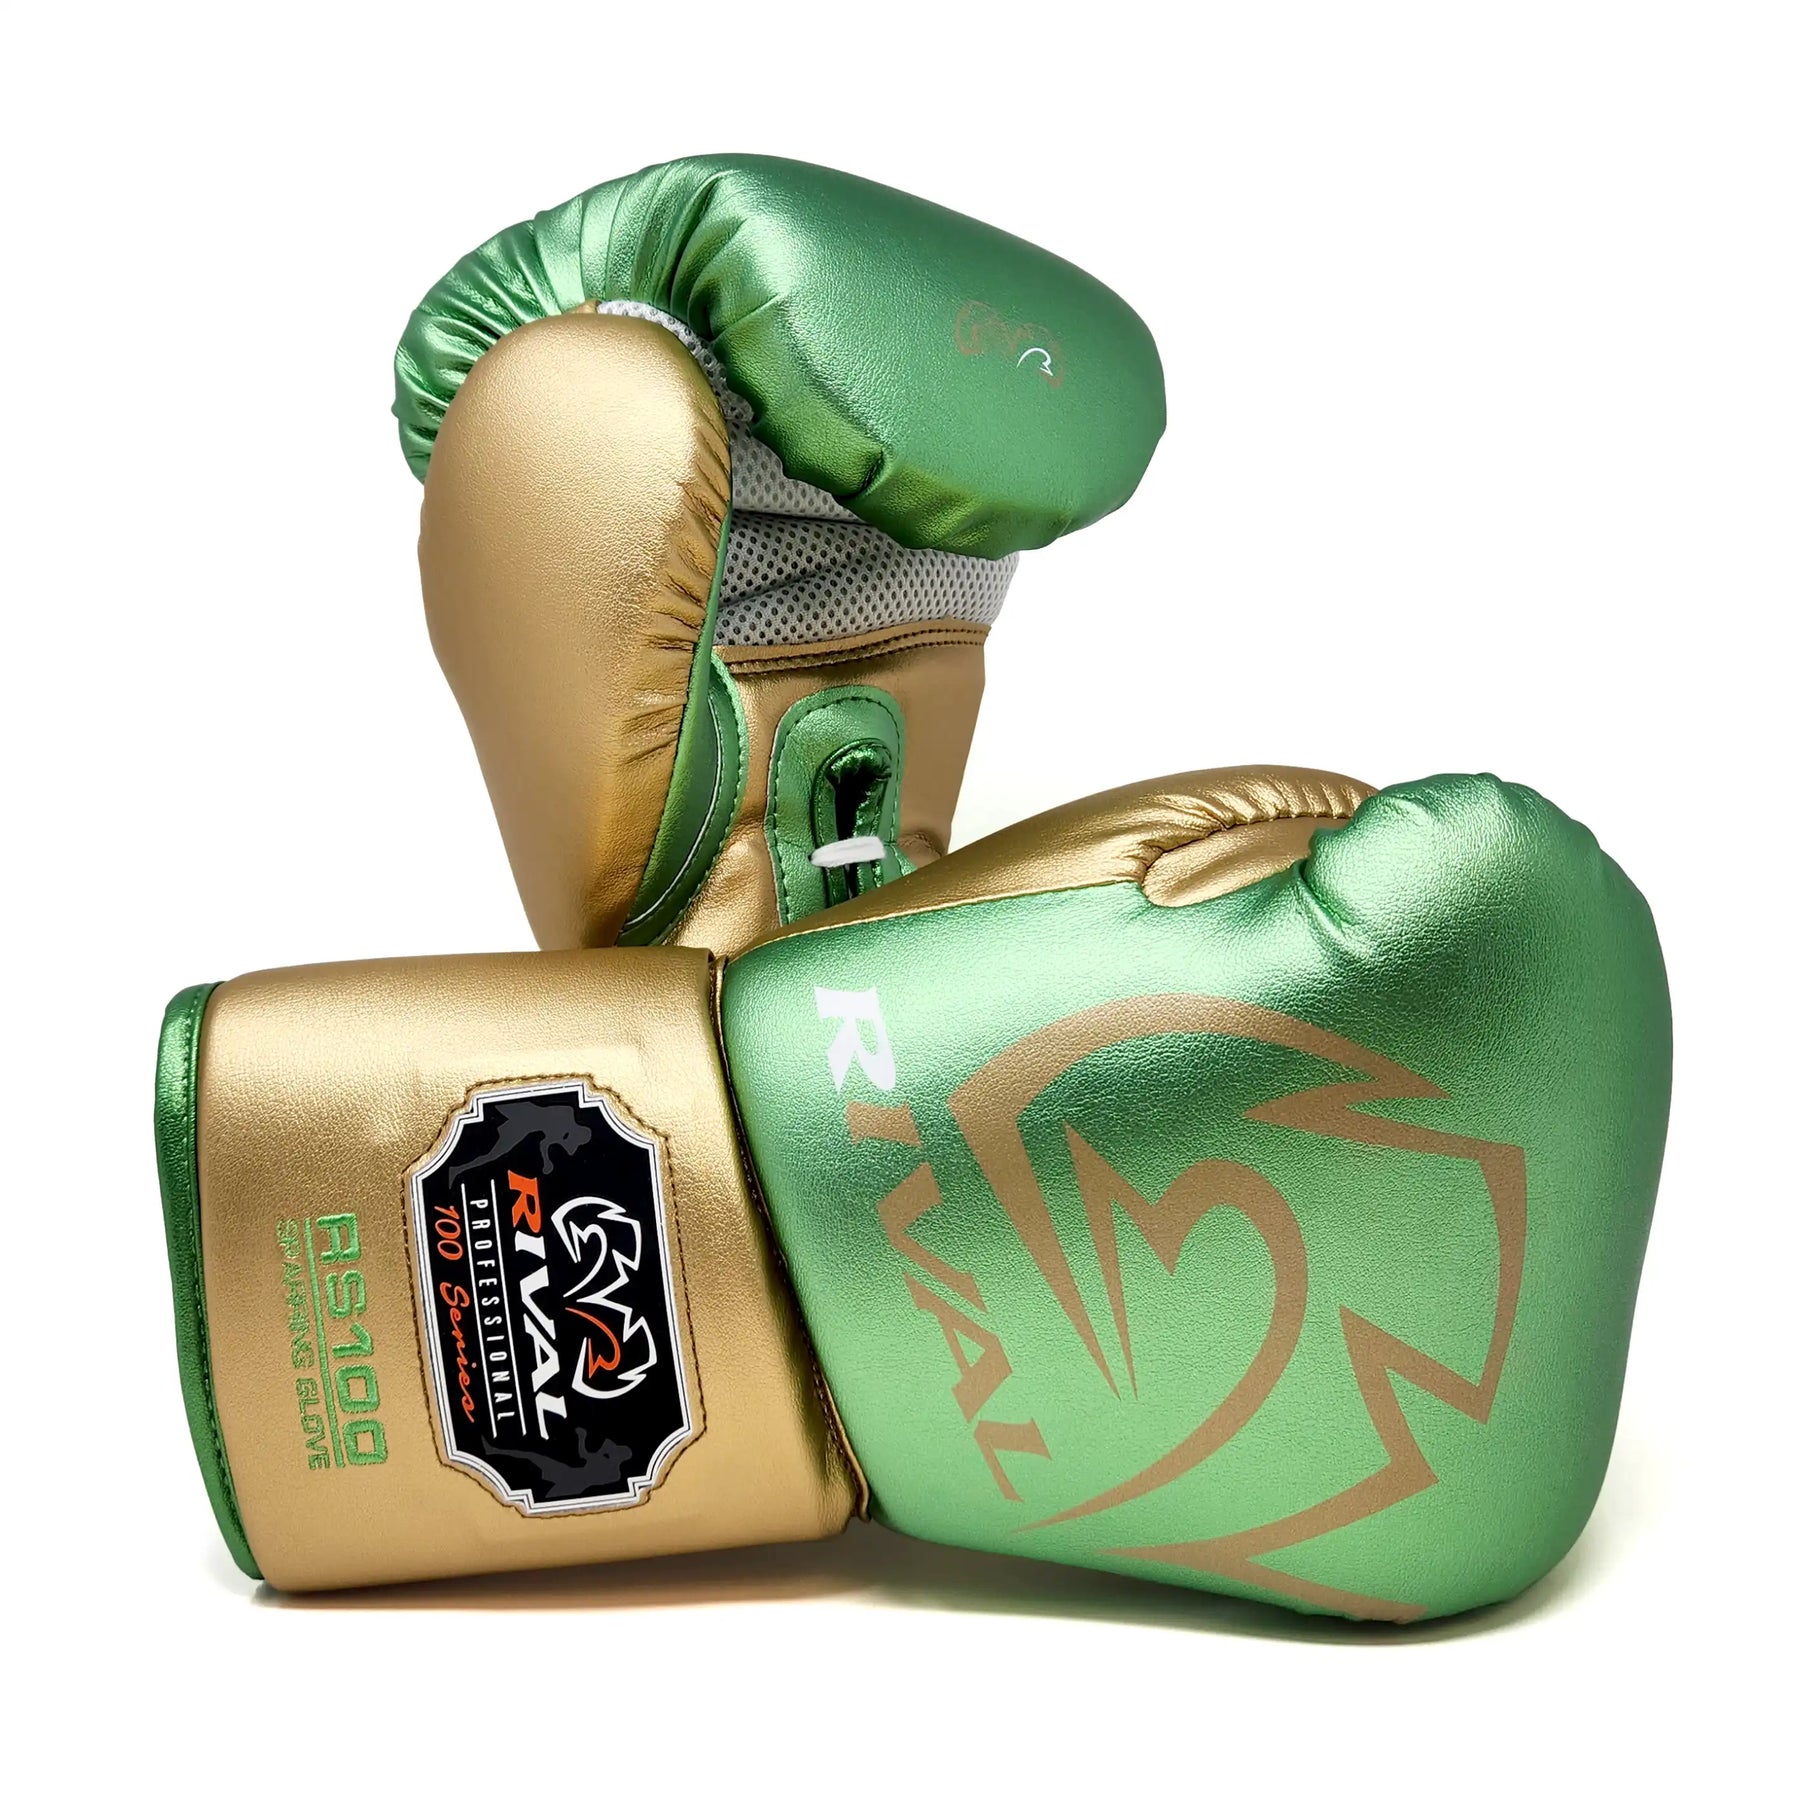 Rival RS100 Professional Sparring Gloves – Rival Boxing Gear USA